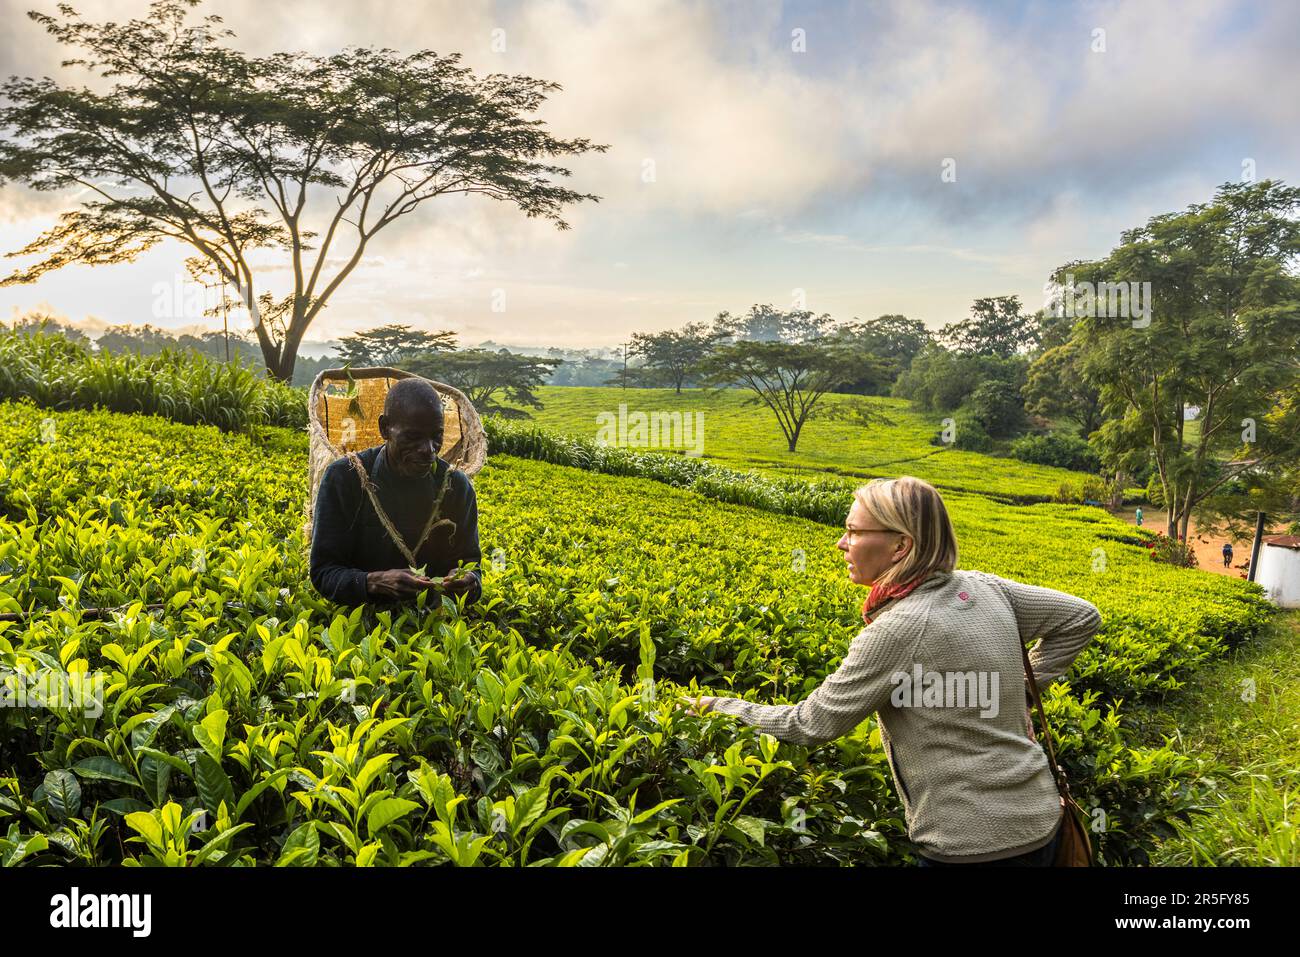 Early in the morning, tea pluckers begin in the fields of Satemwa Estate. Guests at Huntingdon House can watch the tea harvest up close. Satemwa tea and coffee plantation near Thyolo, Malawi Stock Photo